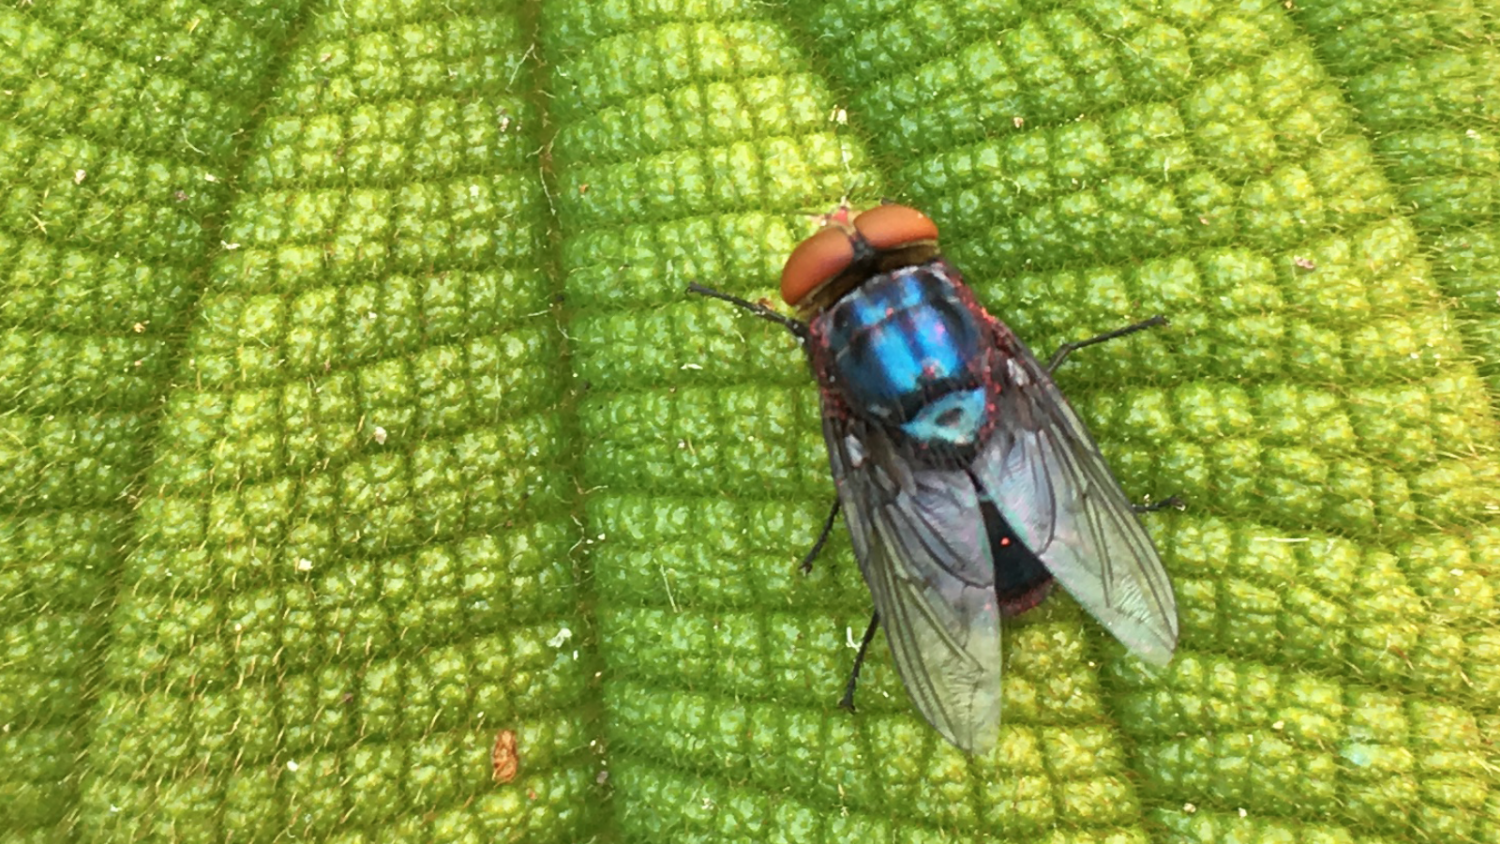 Close-up of fly on plant